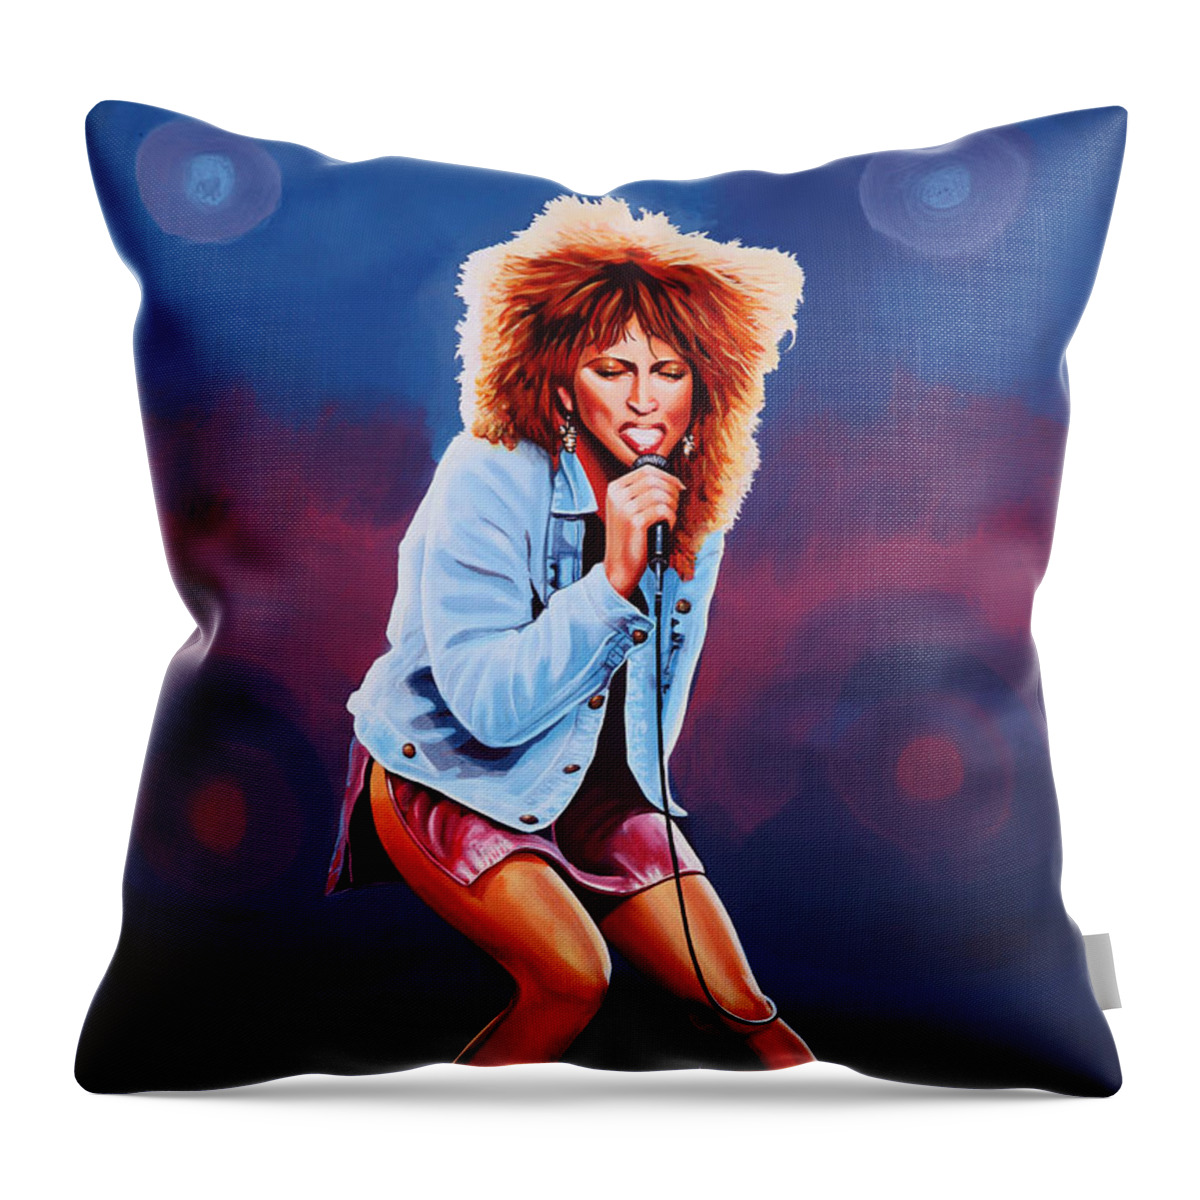 Tina Turner Throw Pillow featuring the painting Tina Turner by Paul Meijering